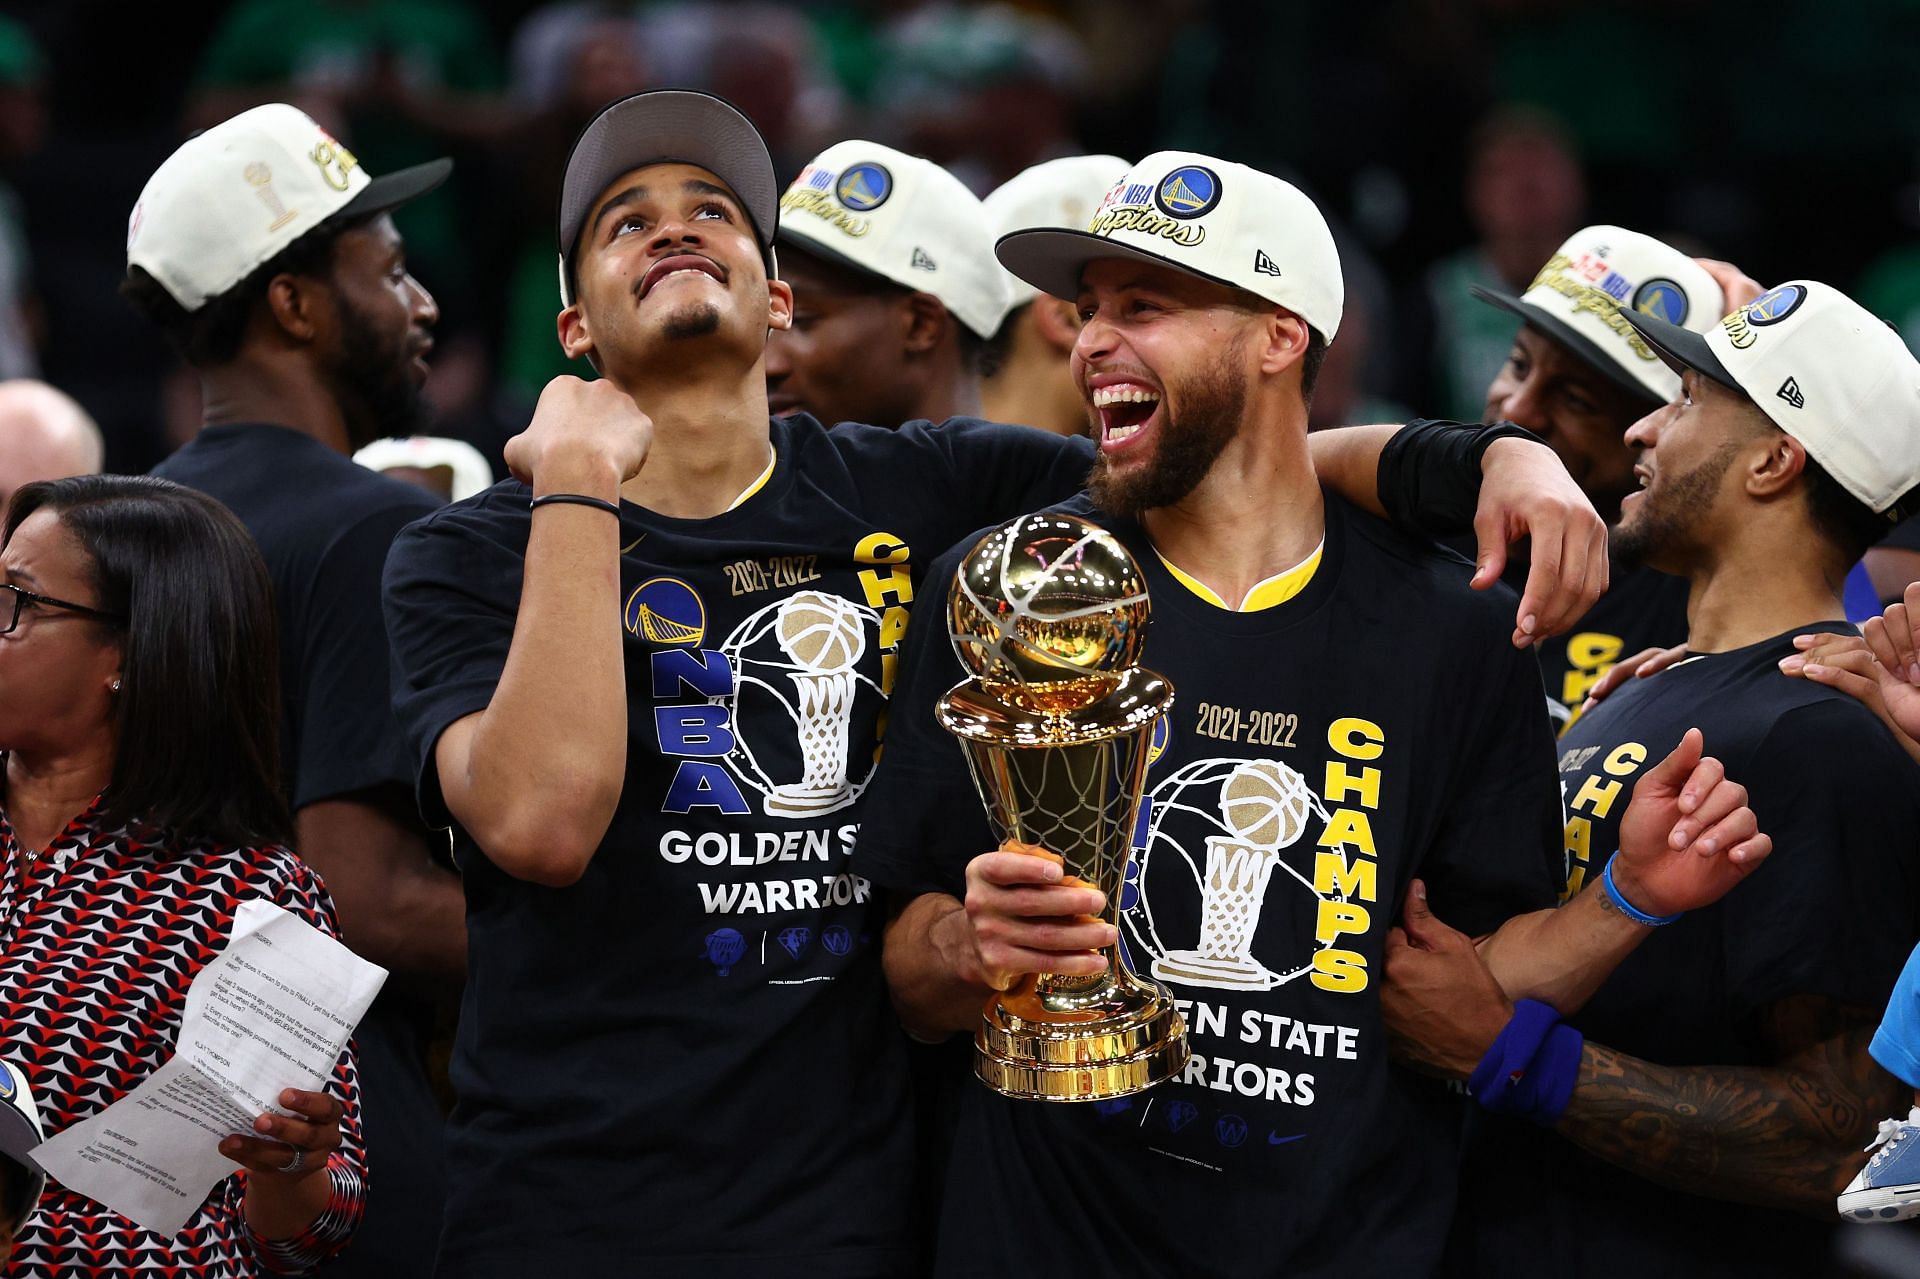 Steph Curry and Jordan Poole of the Golden State Warriors after winning the 2022 NBA Finals